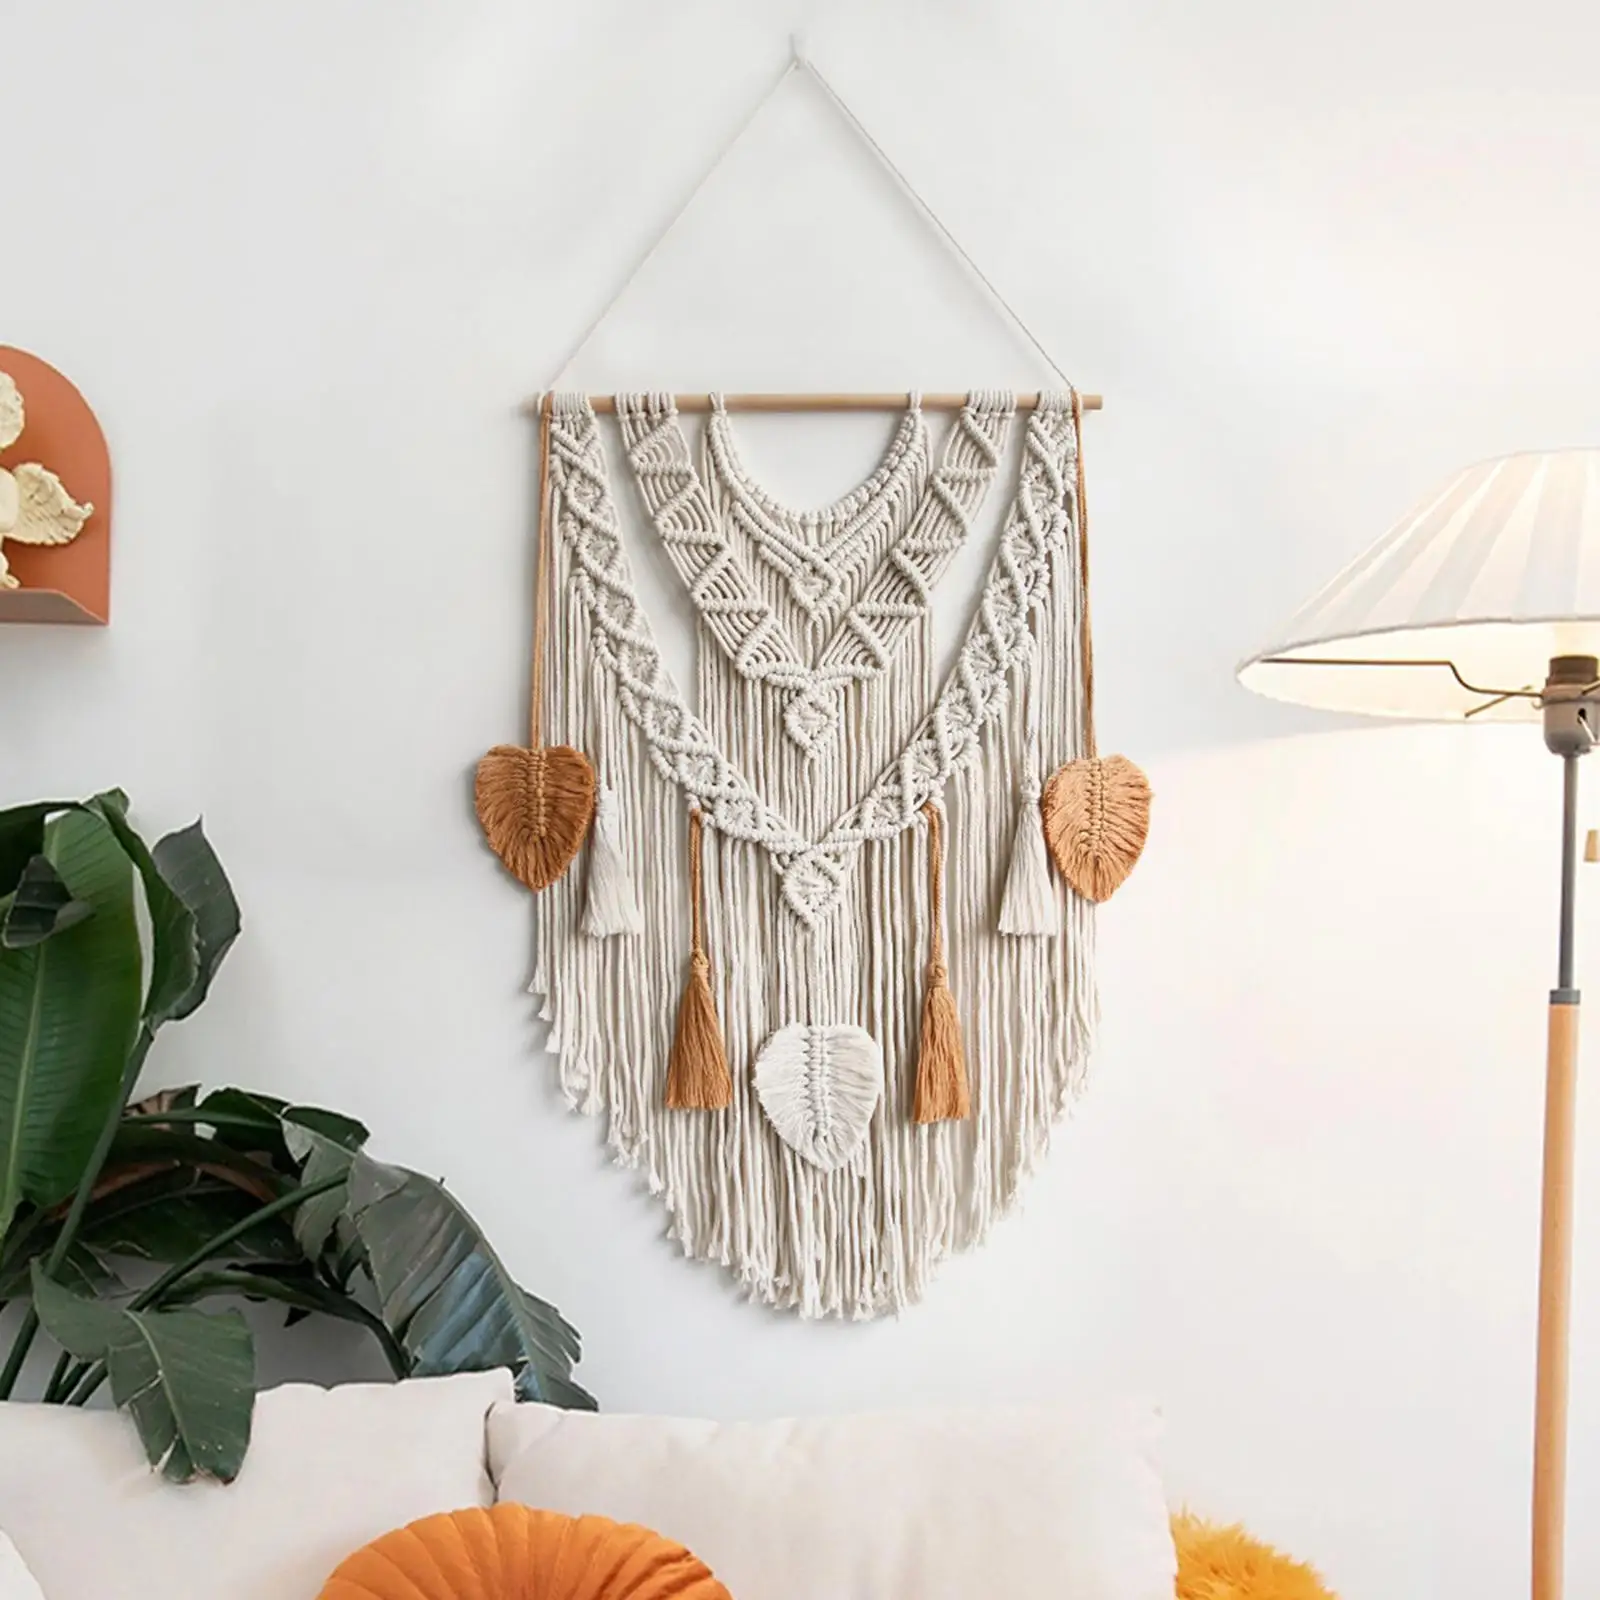 Macrame Wall Hanging Tapestry Beige 21.6x31.5inch Bohemian Handcrafted